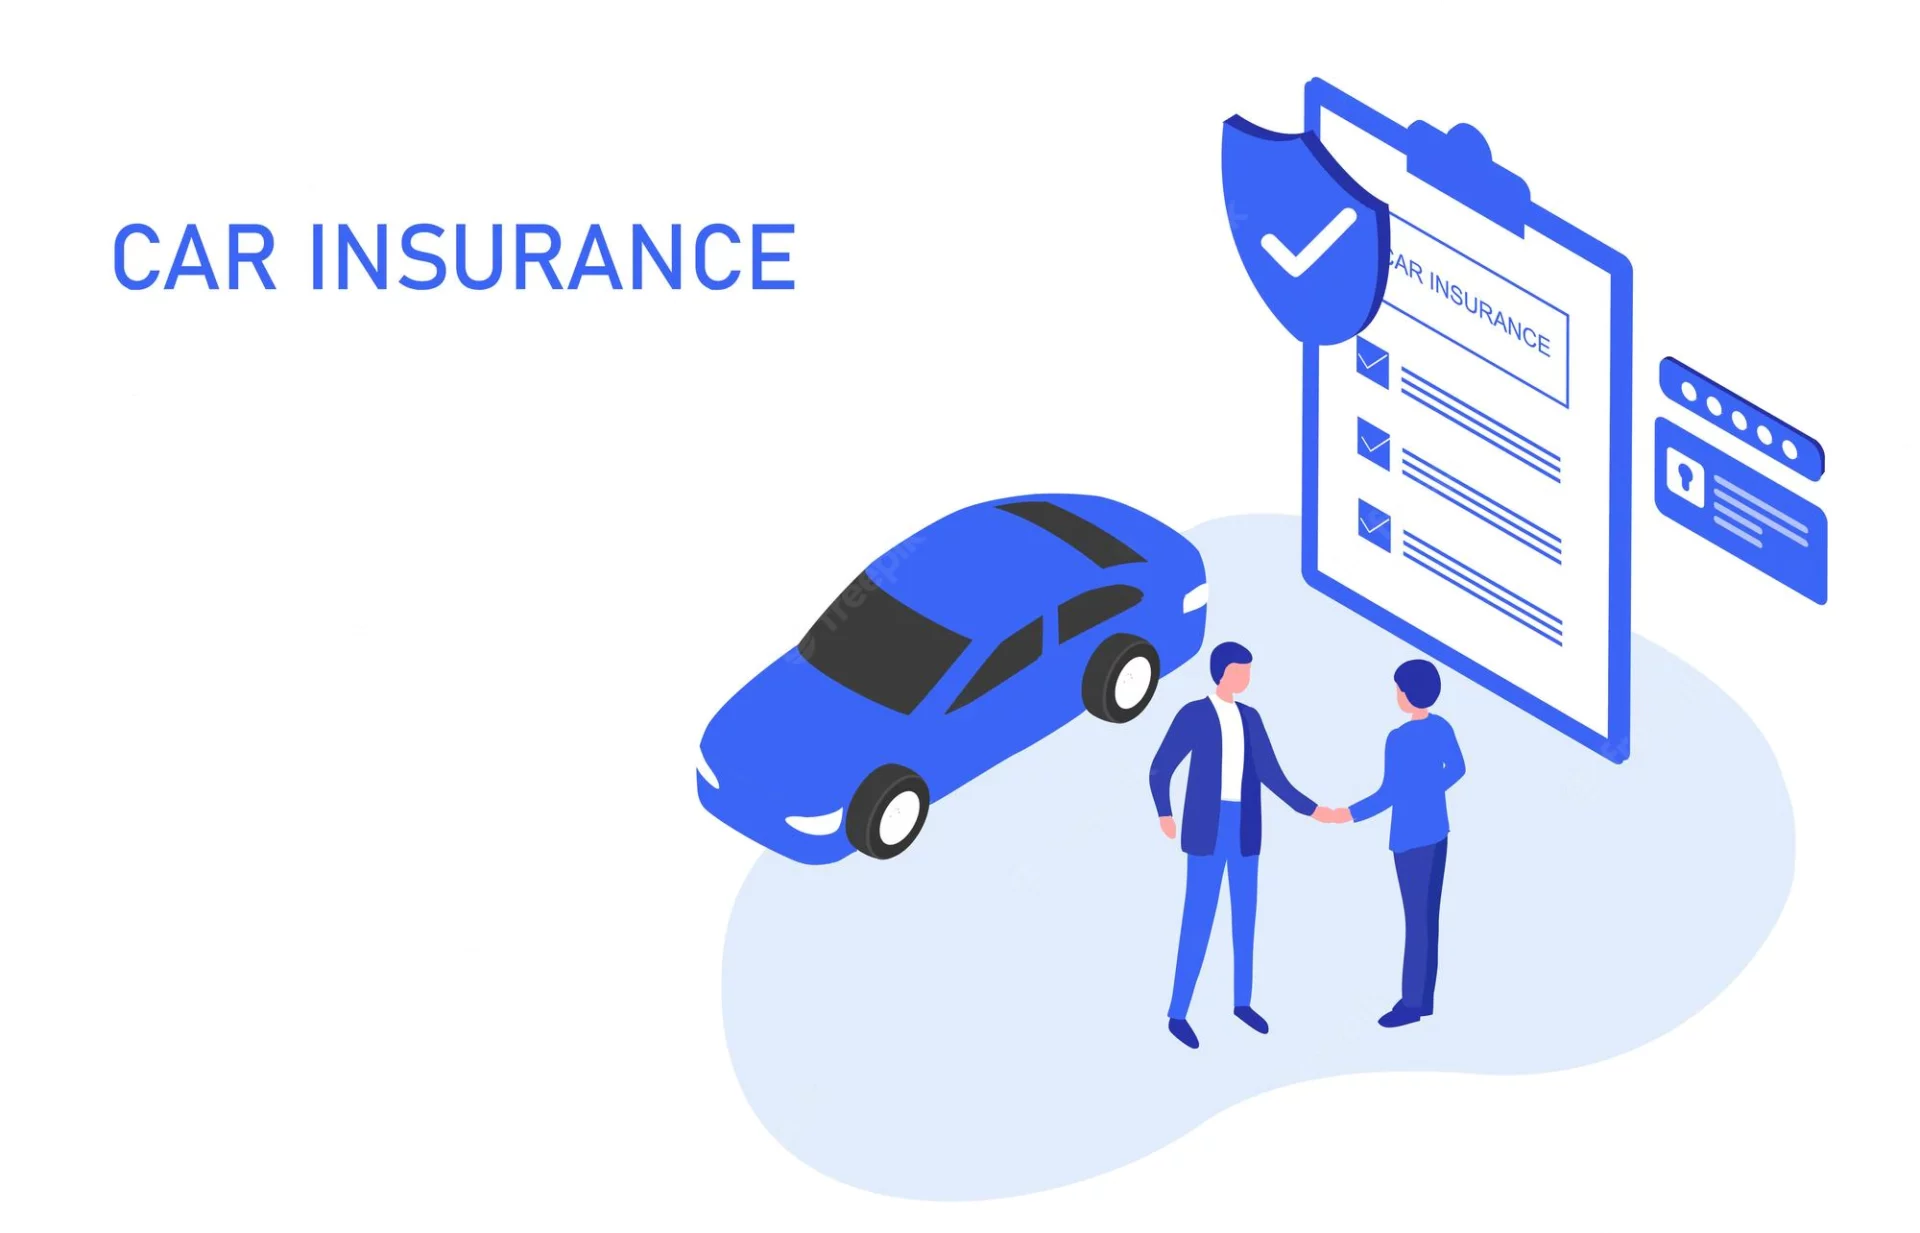 Car insurance cartooned with men shaking hands